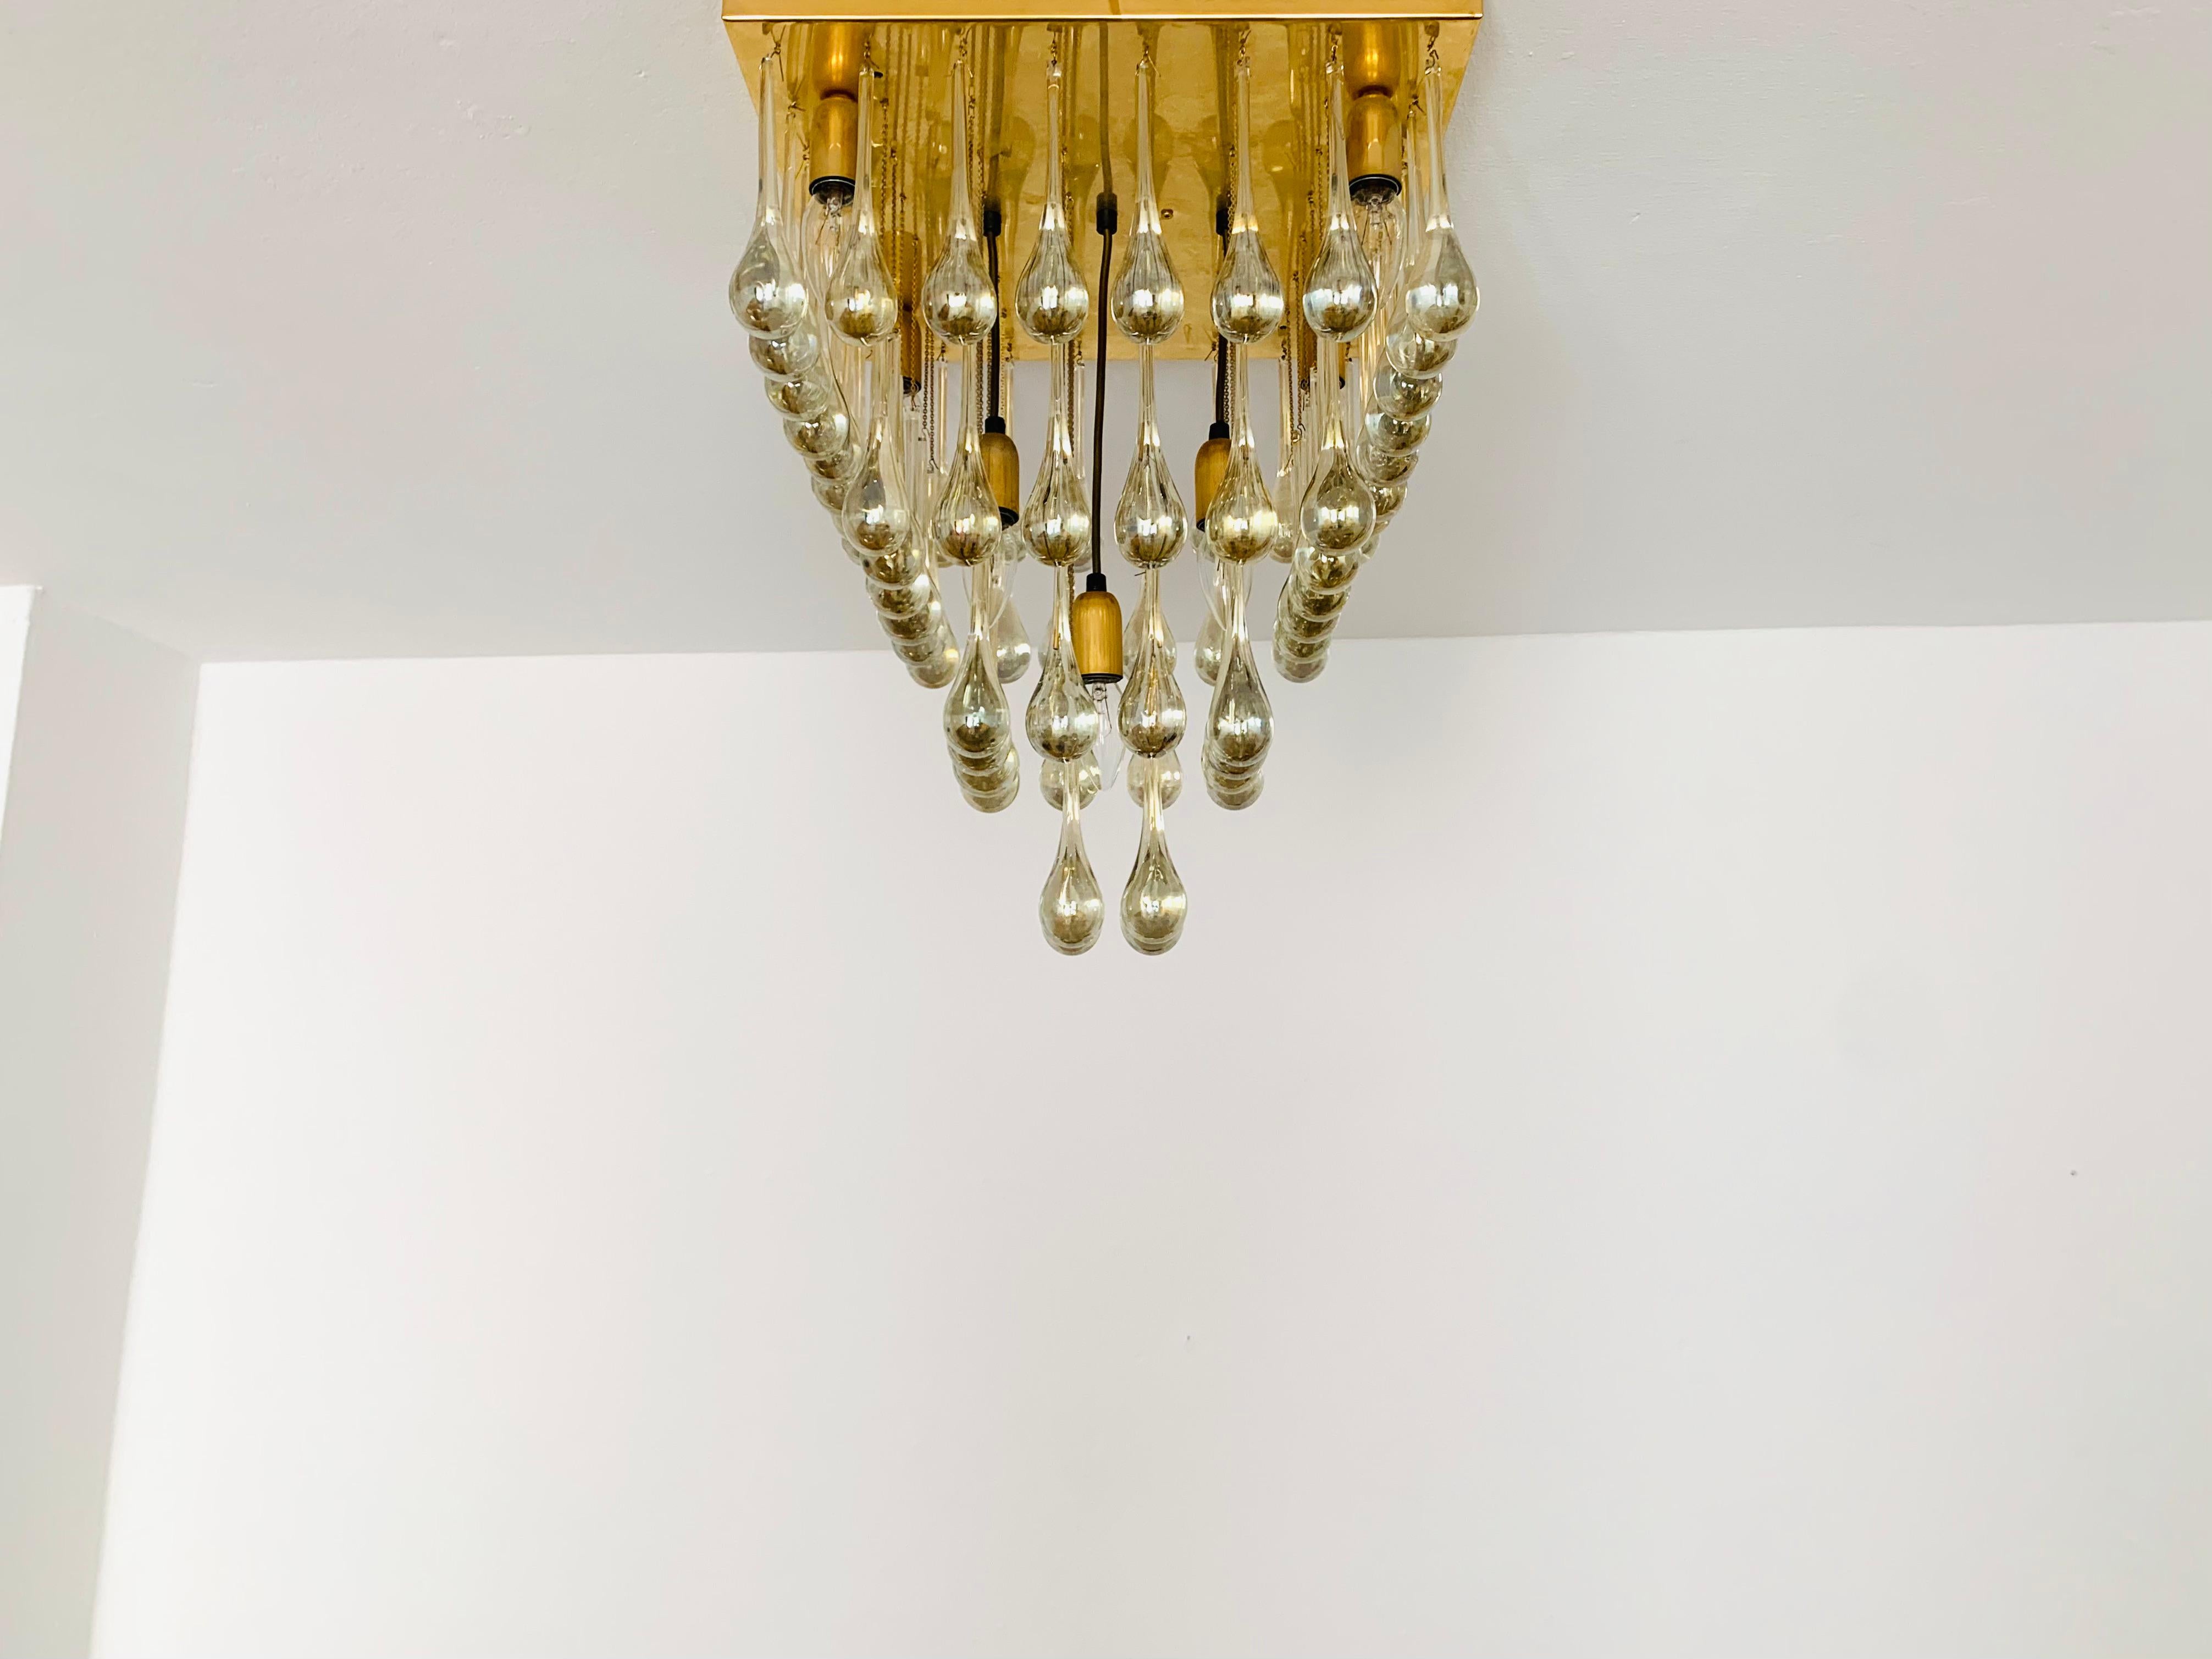 Imposing glass ceiling lamp from the 1960s.
Extraordinarily successful design and very high-quality workmanship.
The 64 glass drops spread a spectacular play of light in the room.
Very luxurious and an asset to any home.

Condition:

Very good